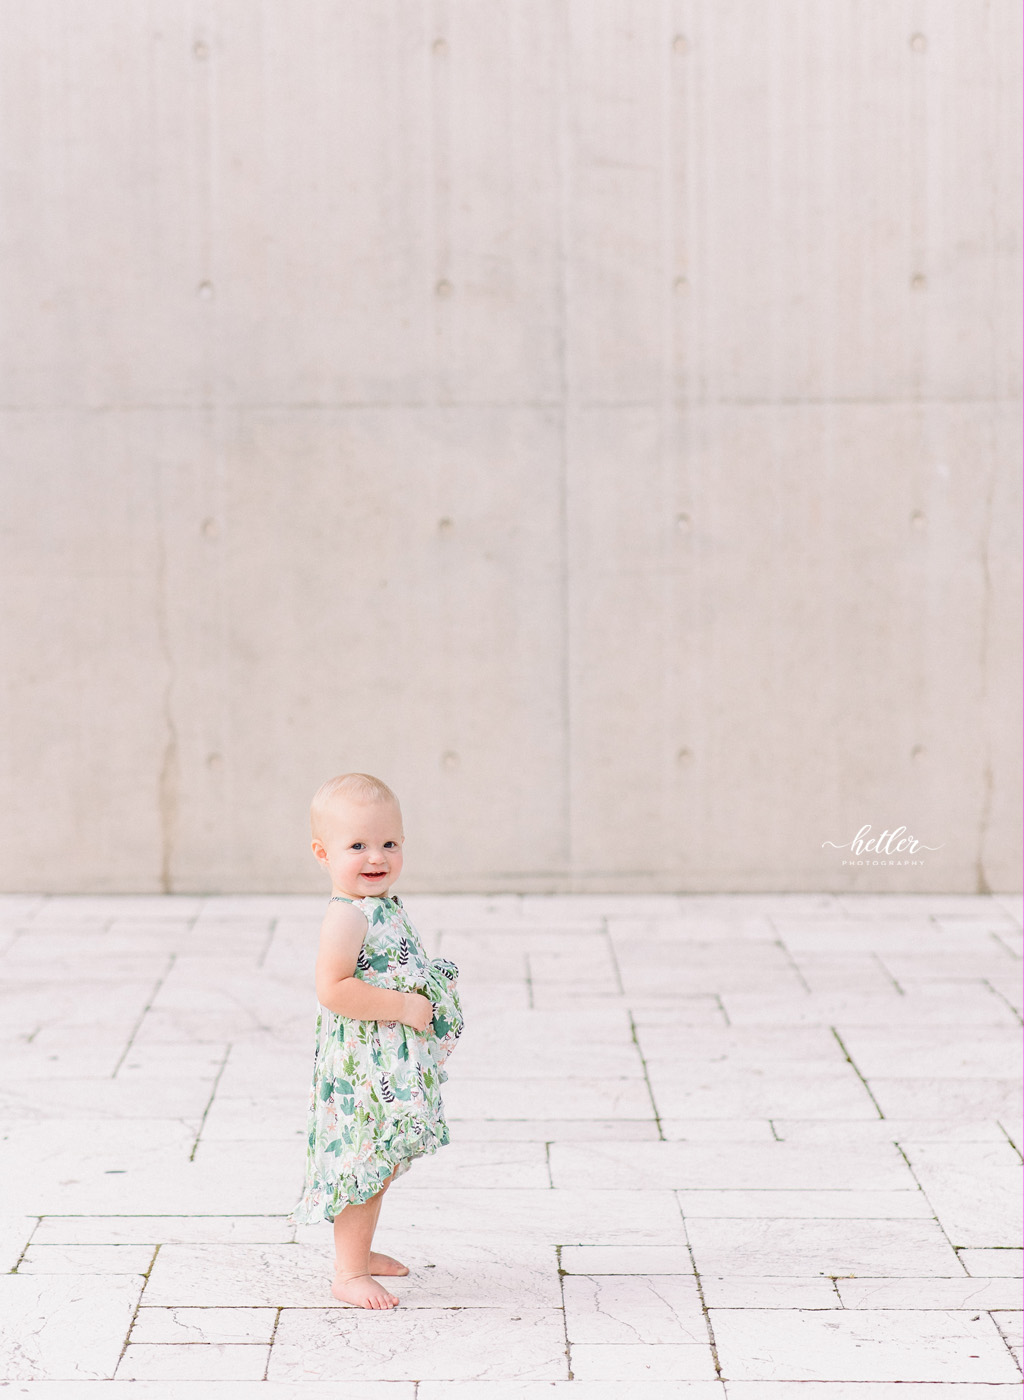 A downtown Grand Rapids family photo session with a light and airy style at the Grand Rapids Art Museum